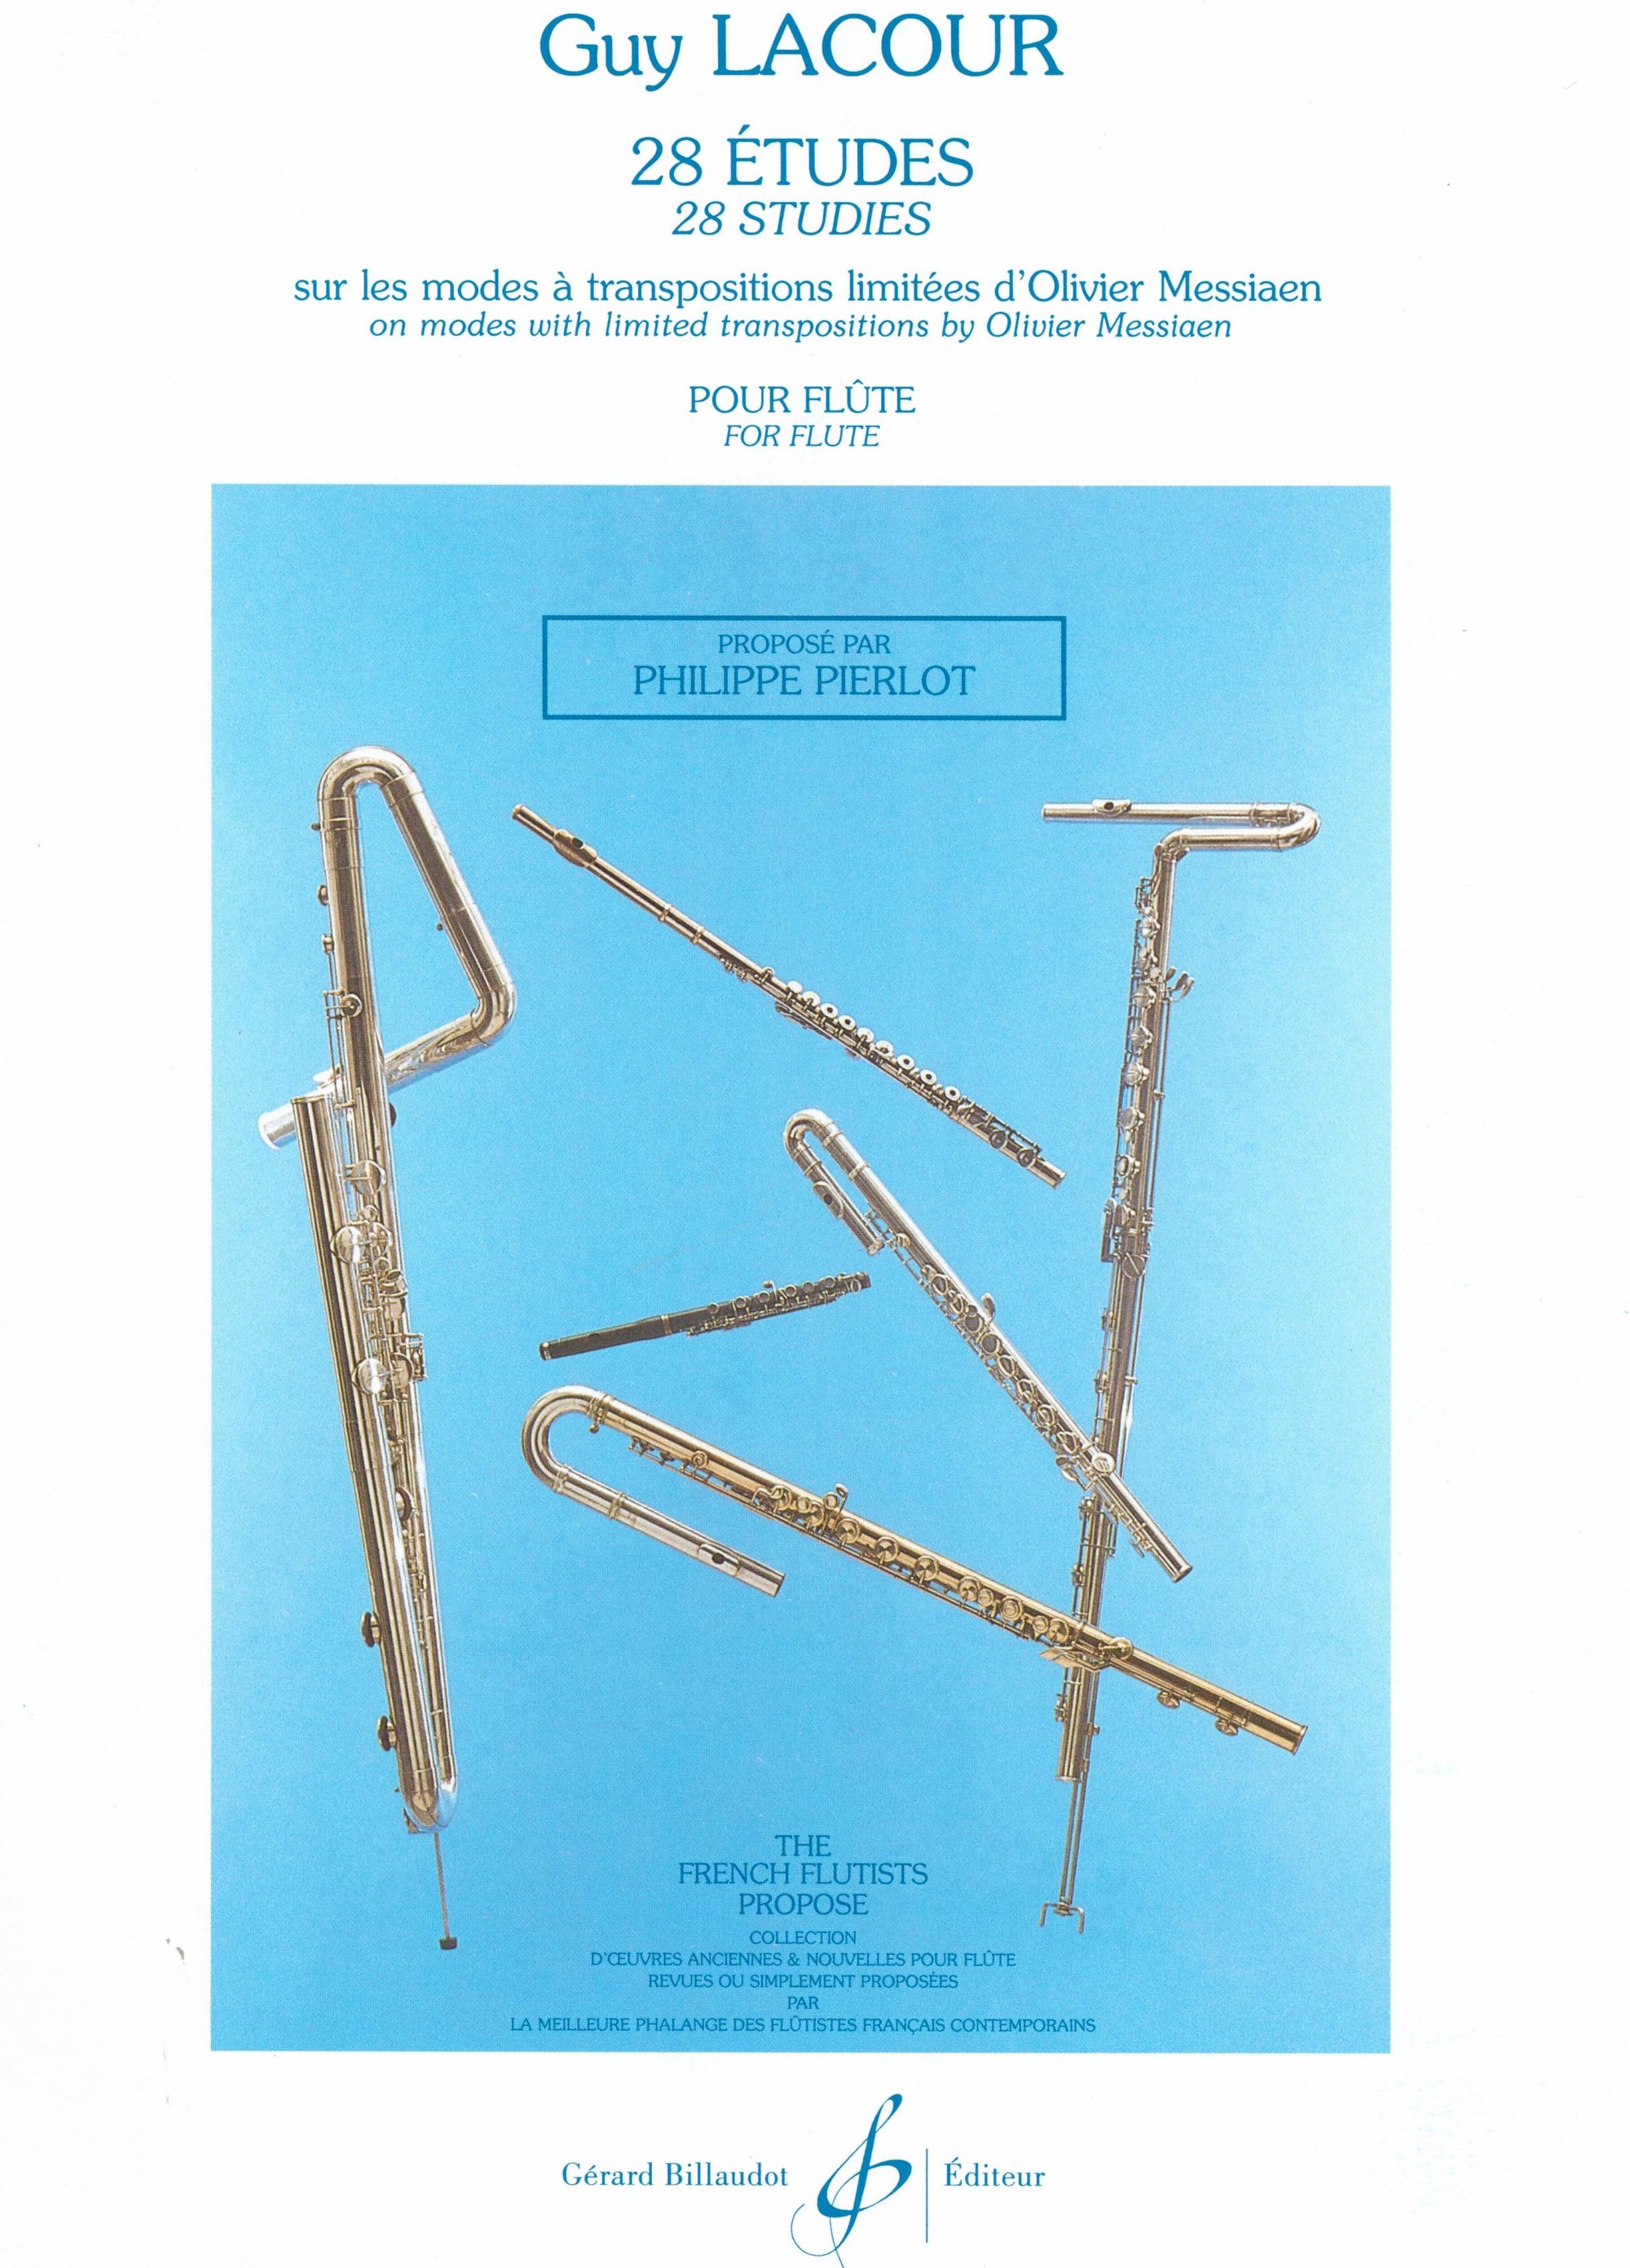 Lacour: 28 Studies for Flute on modes by Olivier Messiaen (arr. for flute)